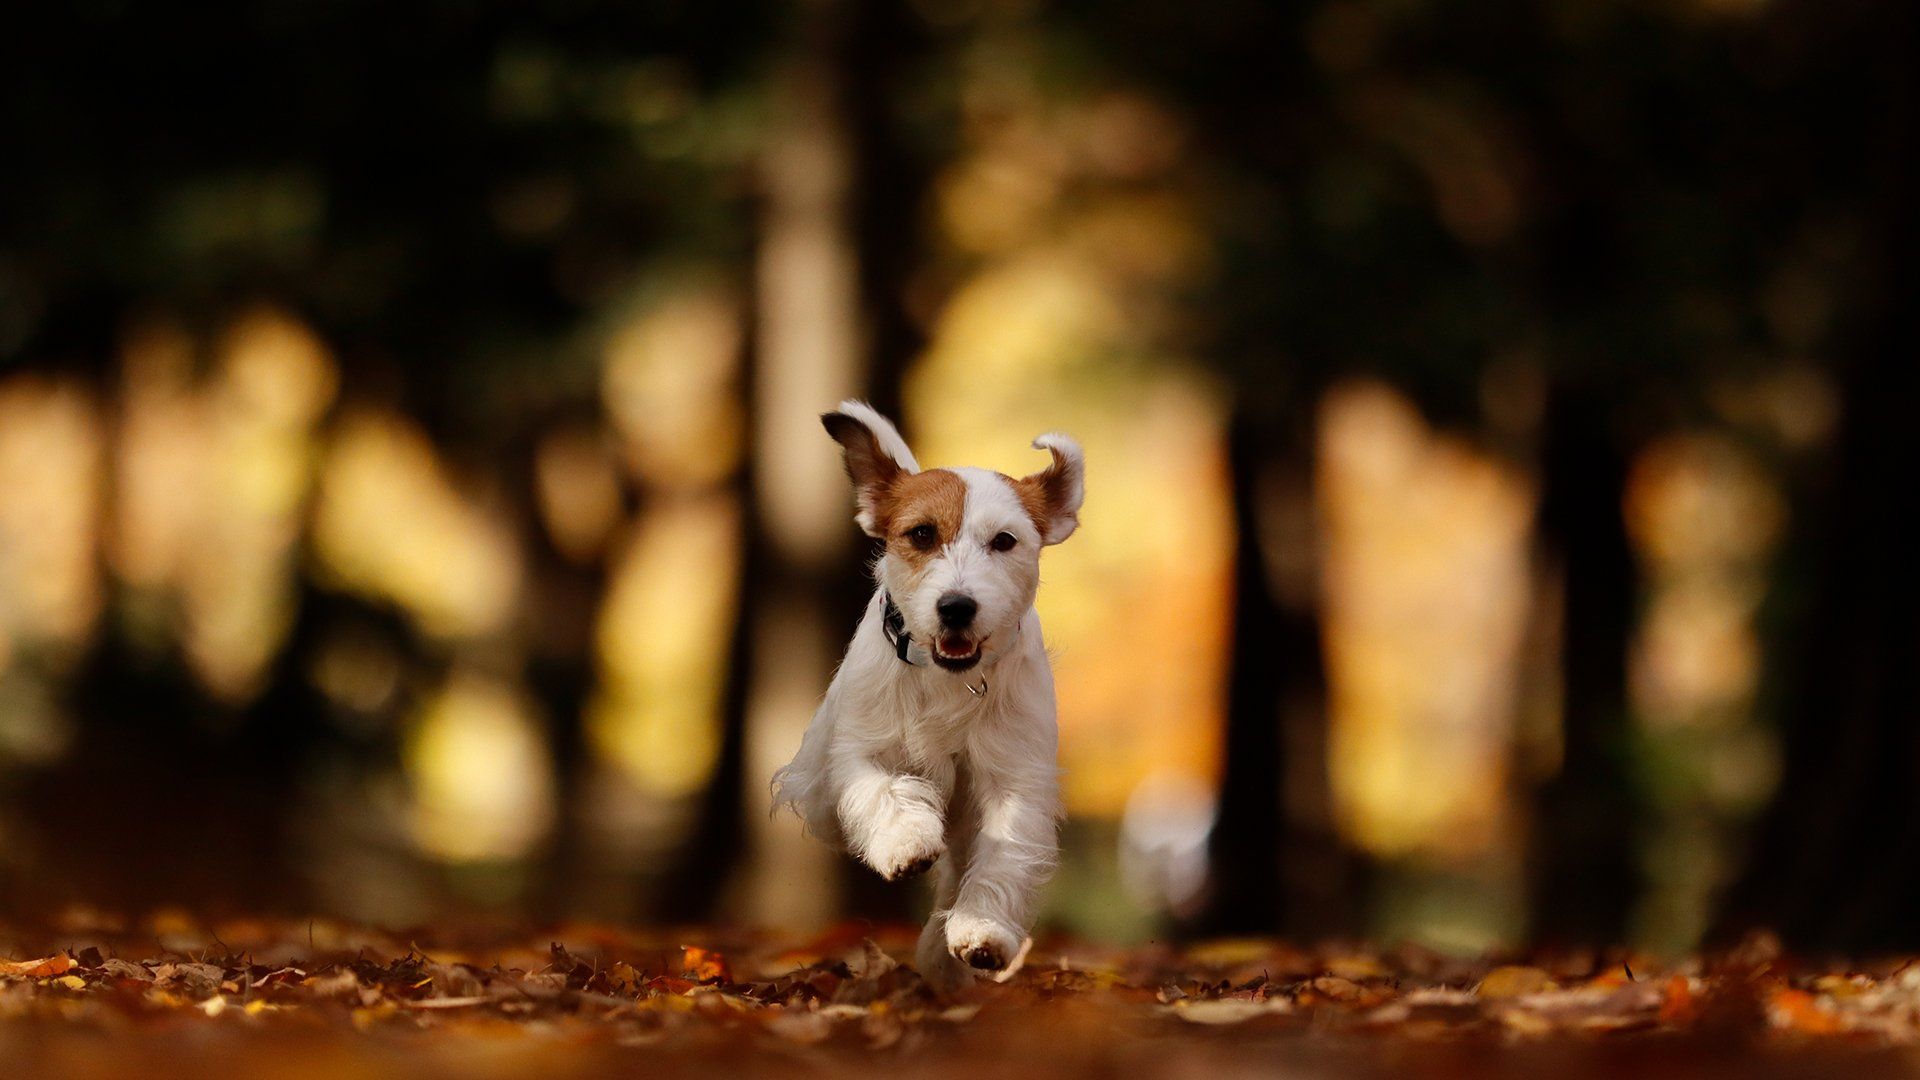 A small dog runs towards the camera on a path covered with leaves.